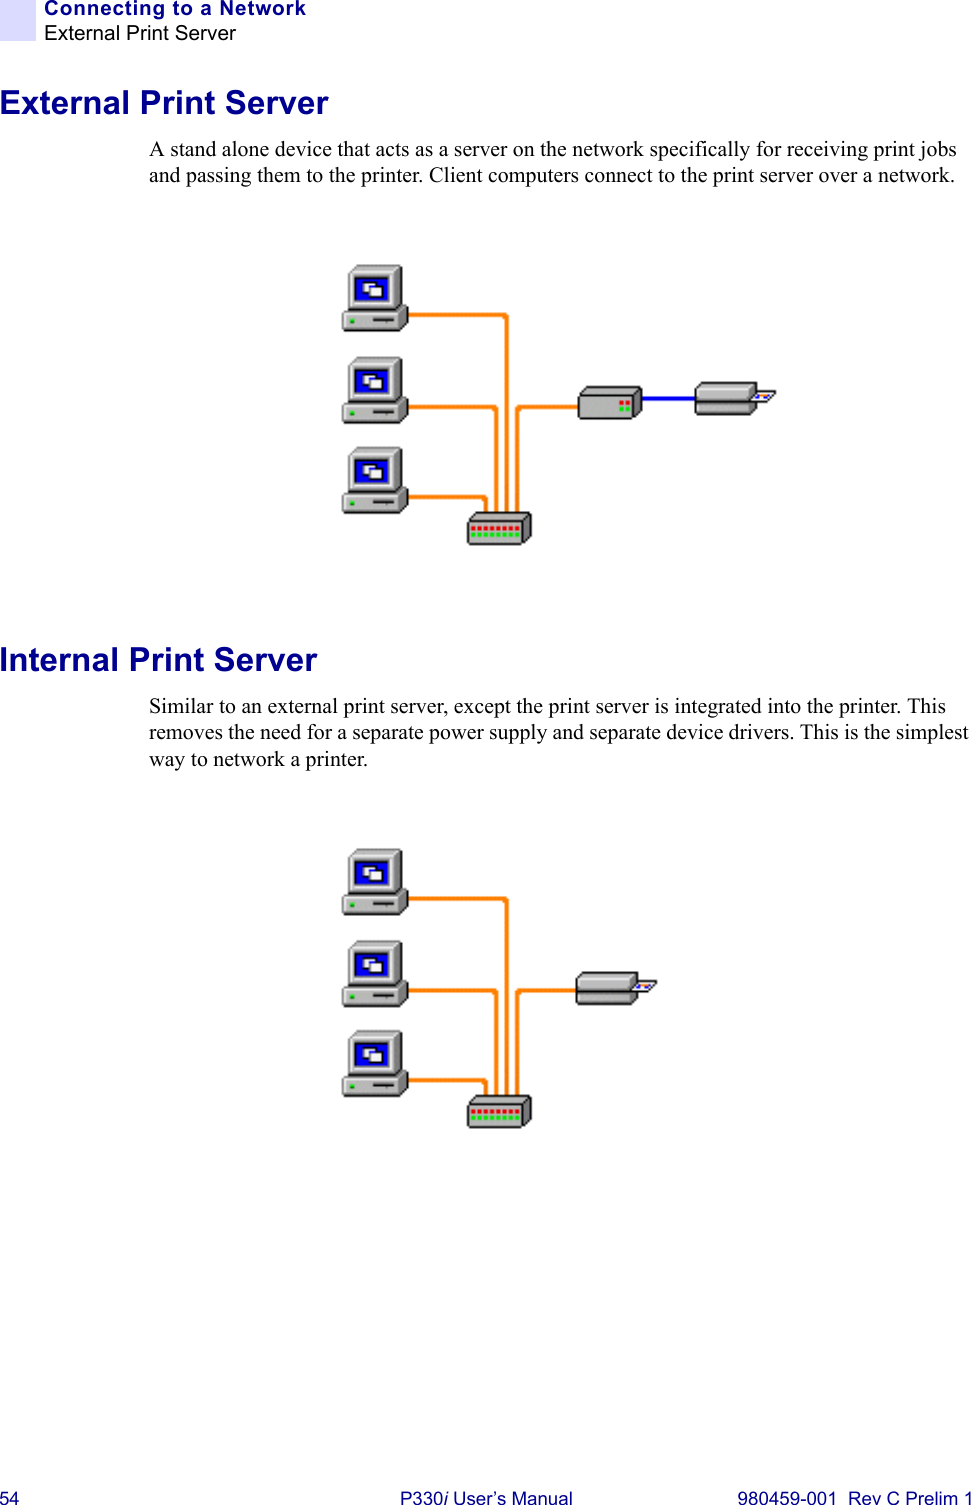 54 P330i User’s Manual 980459-001  Rev C Prelim 1Connecting to a NetworkExternal Print ServerExternal Print ServerA stand alone device that acts as a server on the network specifically for receiving print jobs and passing them to the printer. Client computers connect to the print server over a network.Internal Print ServerSimilar to an external print server, except the print server is integrated into the printer. This removes the need for a separate power supply and separate device drivers. This is the simplest way to network a printer.